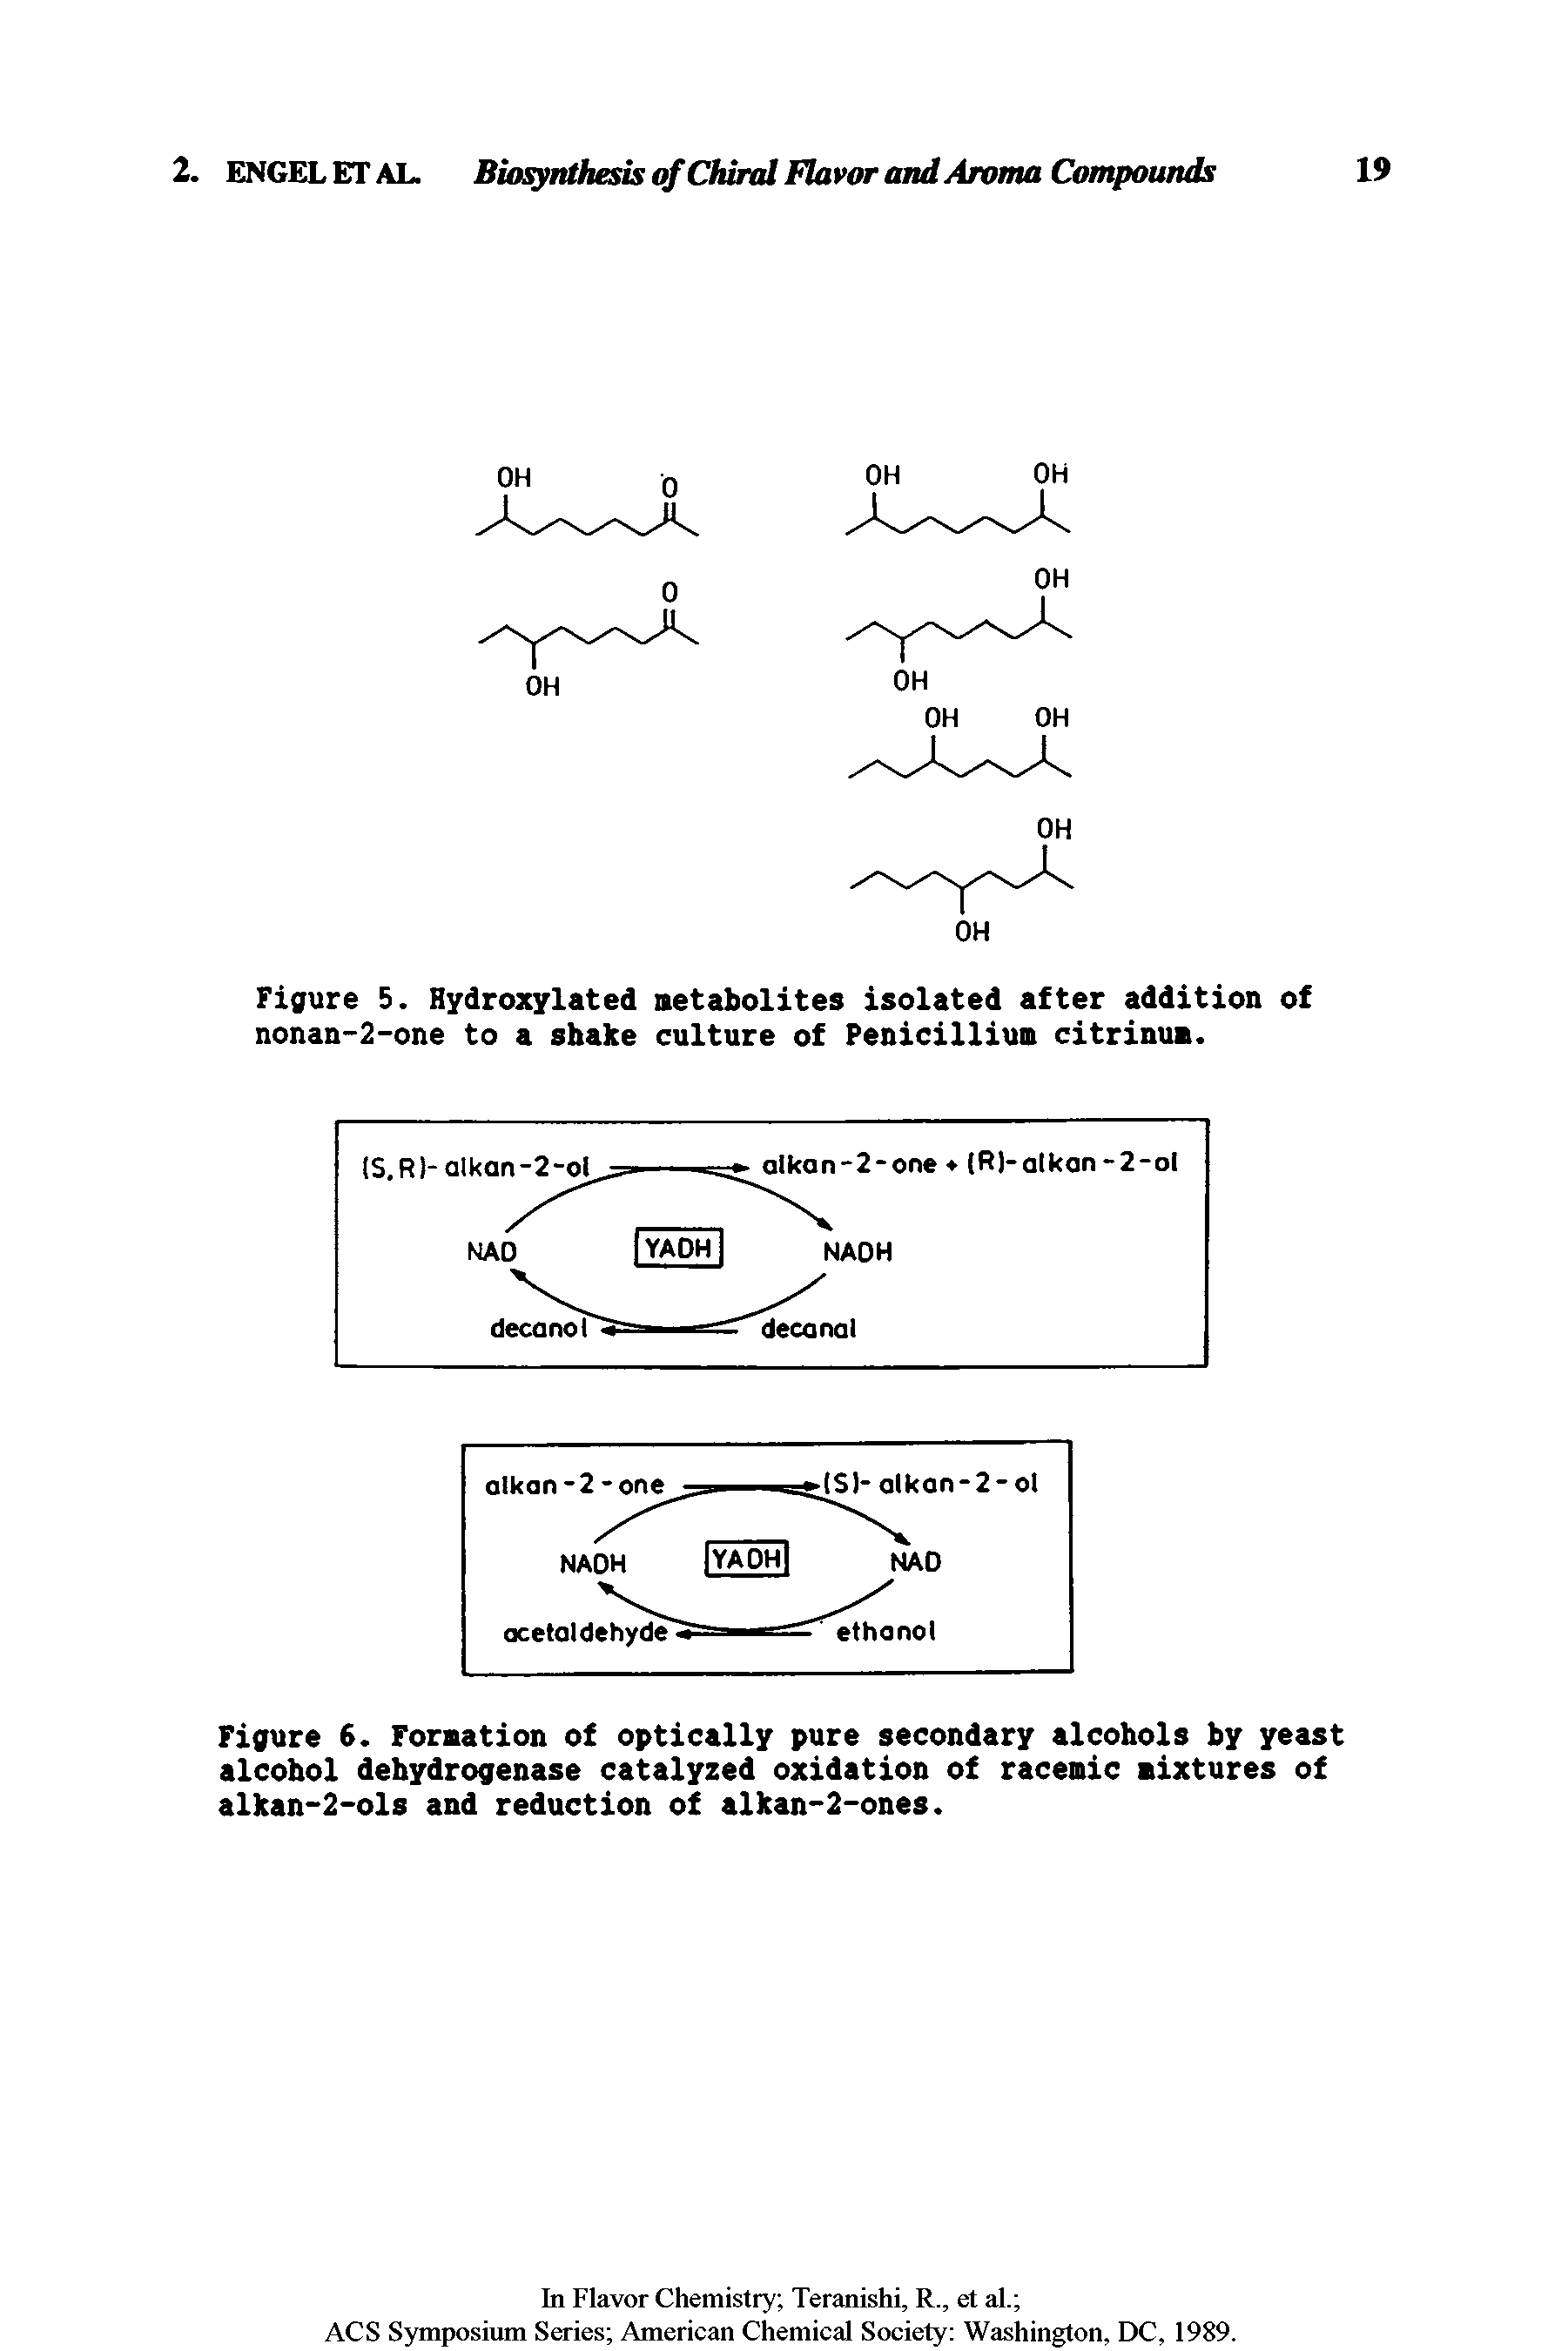 Figure 6. Fornation of optically pure secondary alcohols by yeast alcohol dehydrogenase catalyzed oxidation of racemic mixtures of alkan-2-ols and reduction of alkan-2-ones.